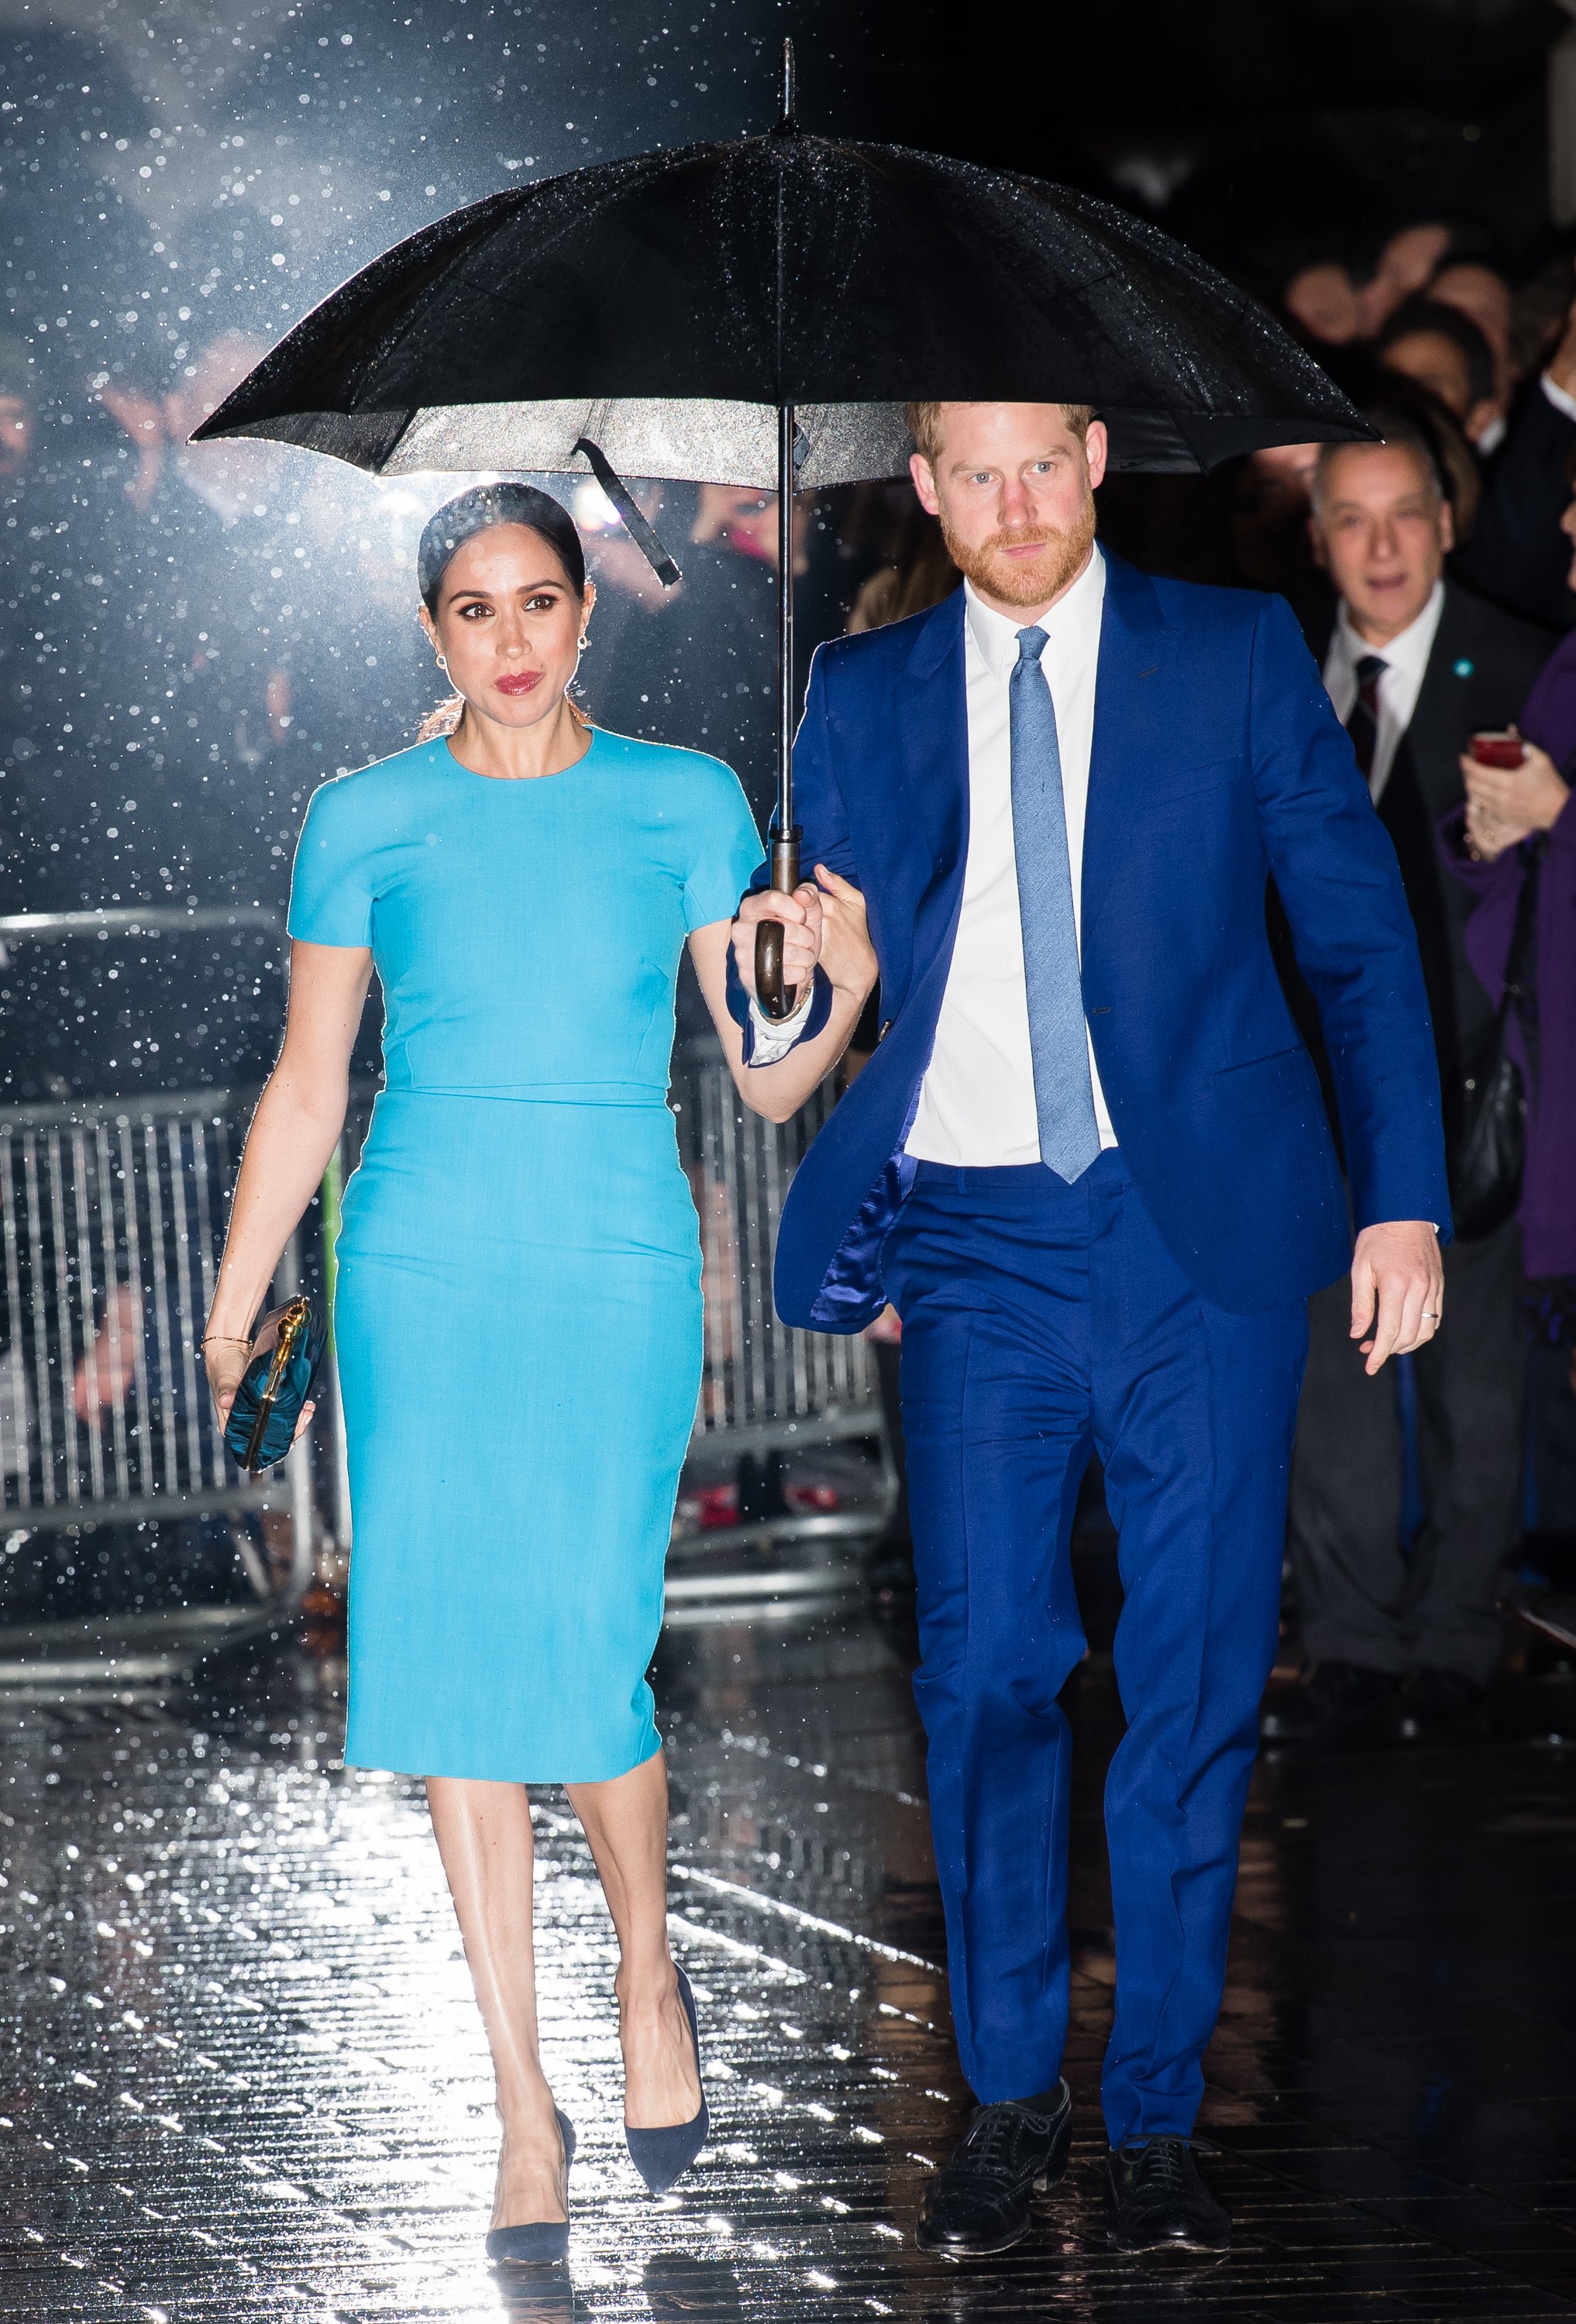 Prince Harry and Meghan Markle attend The Endeavour Fund Awards on March 05, 2020, in London, England | Photo: Getty Images.